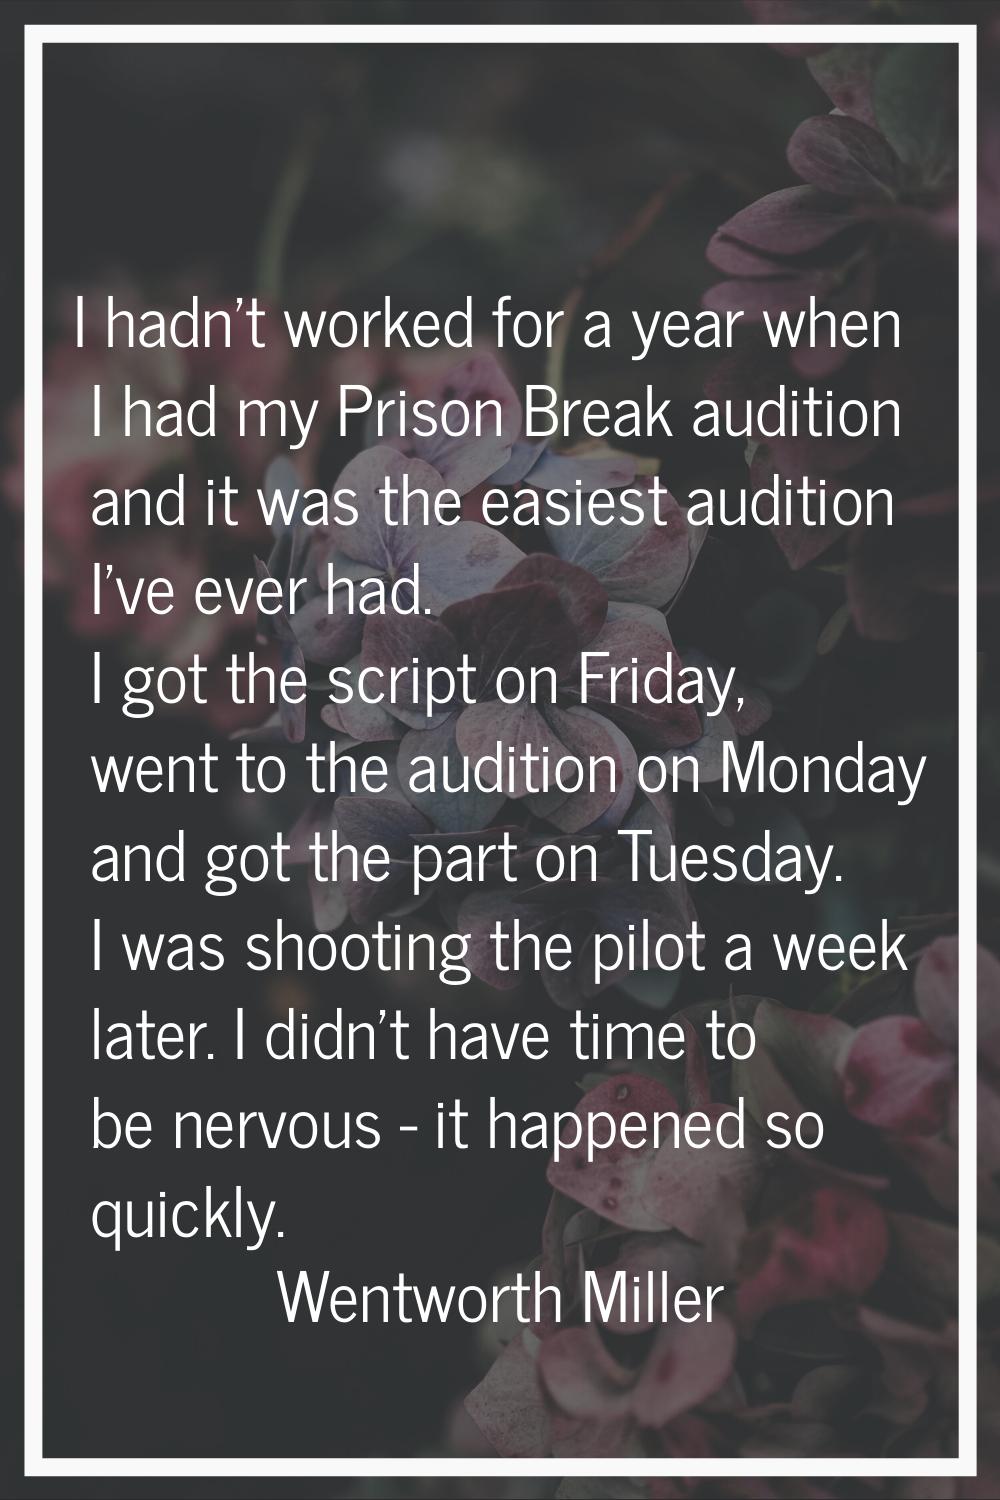 I hadn't worked for a year when I had my Prison Break audition and it was the easiest audition I've